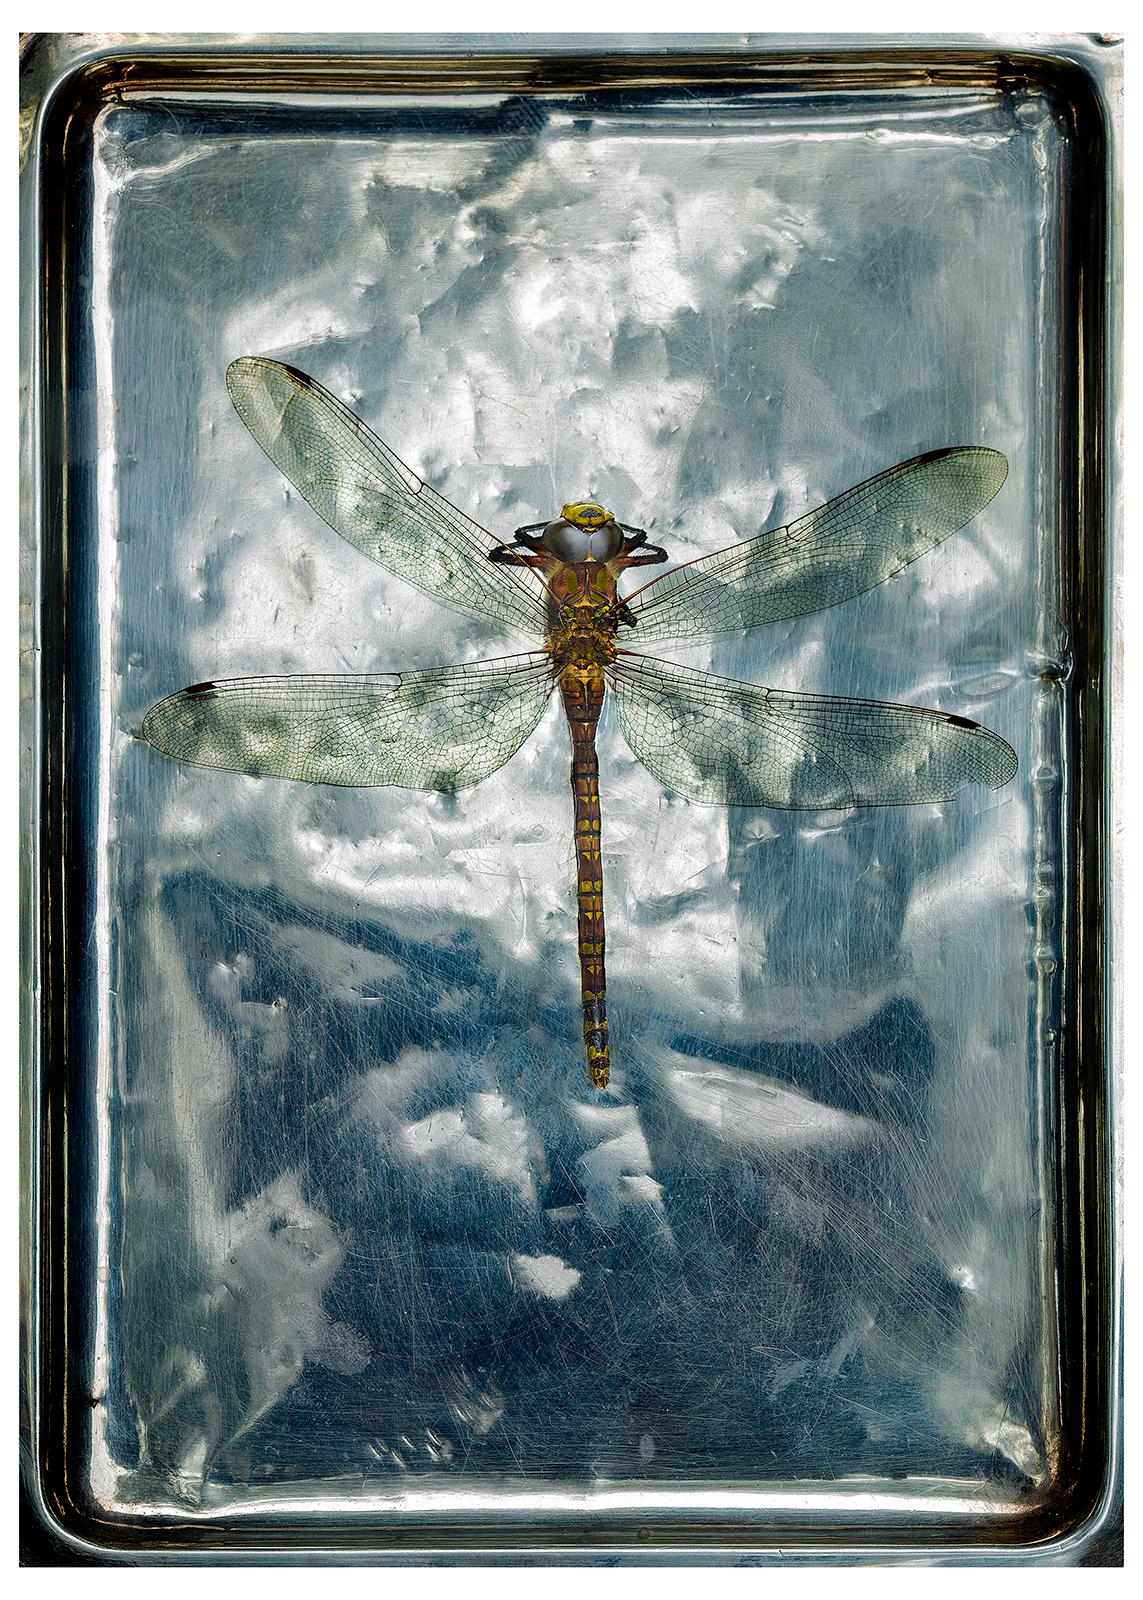 Ian Sanderson Color Photograph - Dragonfly - Signed limited edition nature print, still life colour photo, insect